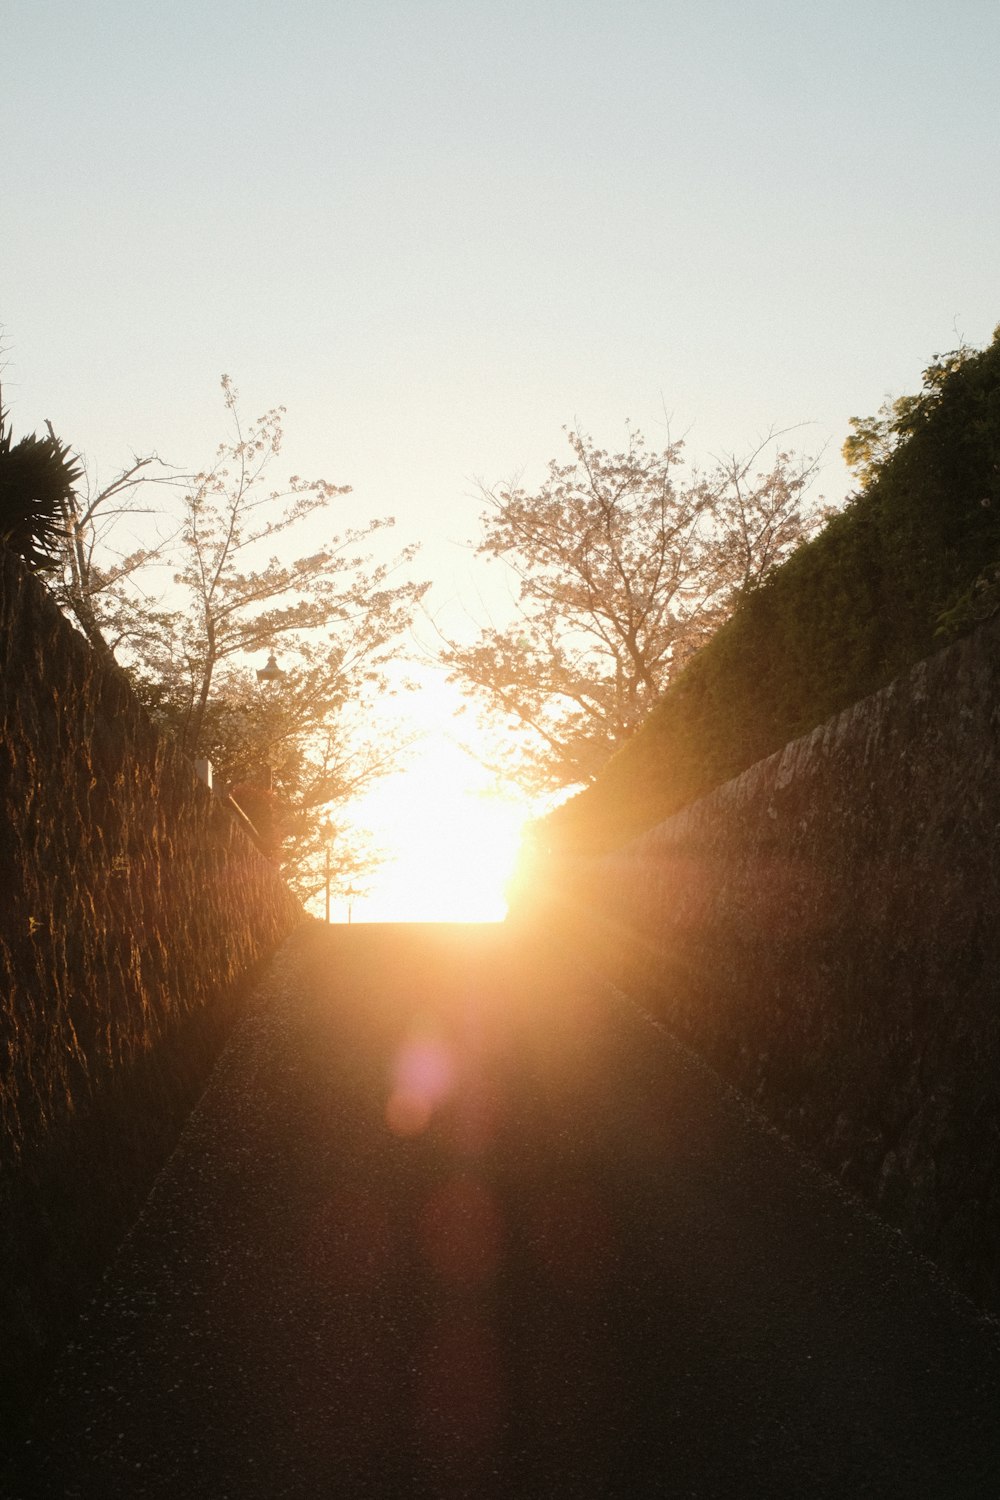 the sun is setting behind a stone wall